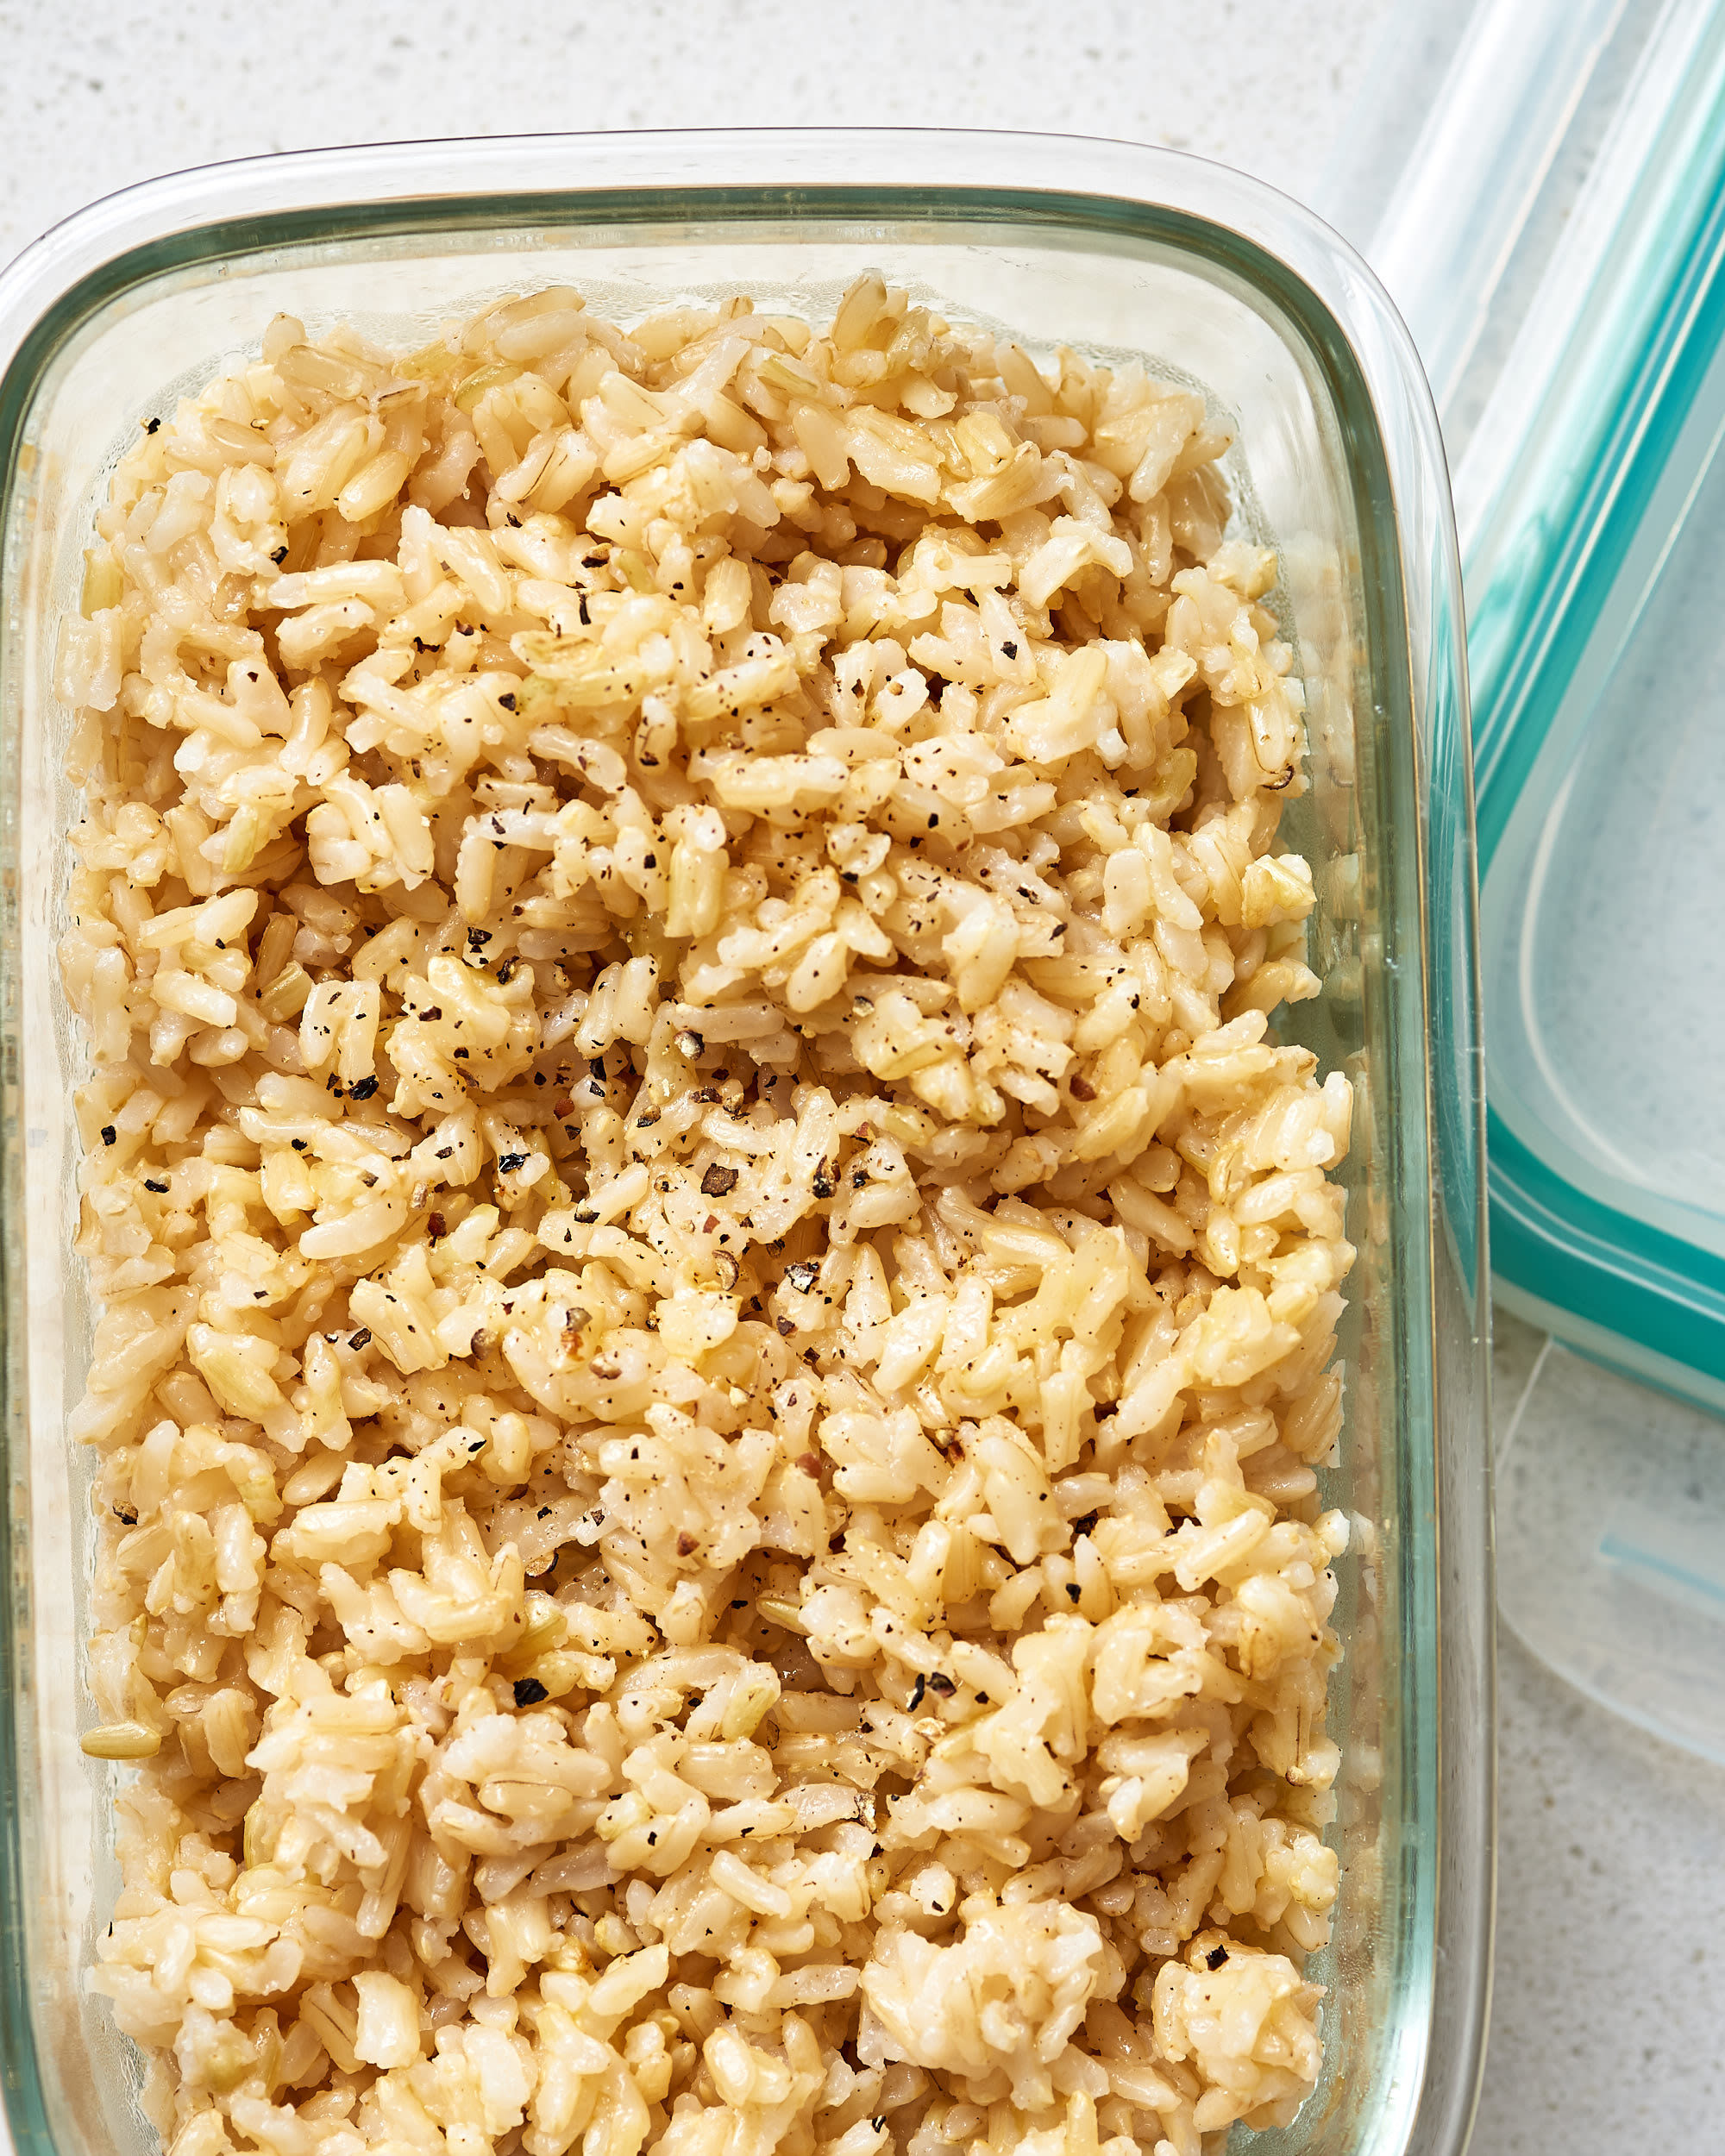 Brown Rice In Slow Cooker
 Easy Slow Cooker Brown Rice